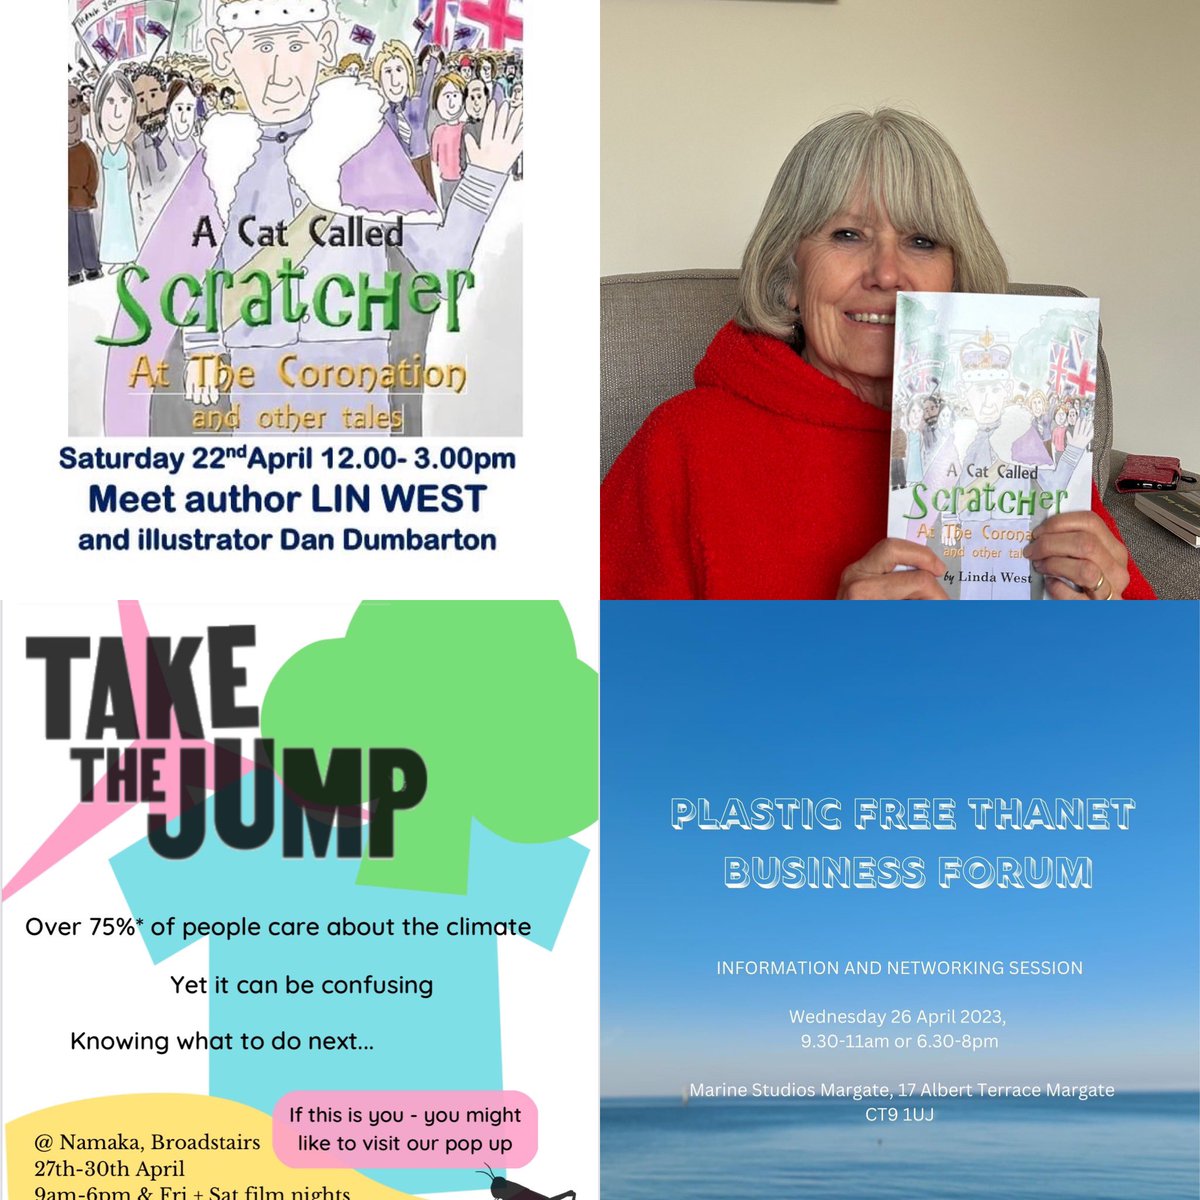 Breakfast for a Saturday @academyfmthanet from 8 - 11. At 9:20 chatting to @DrChrisNewman @taketheJUMPnow, then after 10 local author Lin West joins me plus Louisa @noplasticthanet tells me about their Business Forum On FM and online bit.ly/3xxbmSl